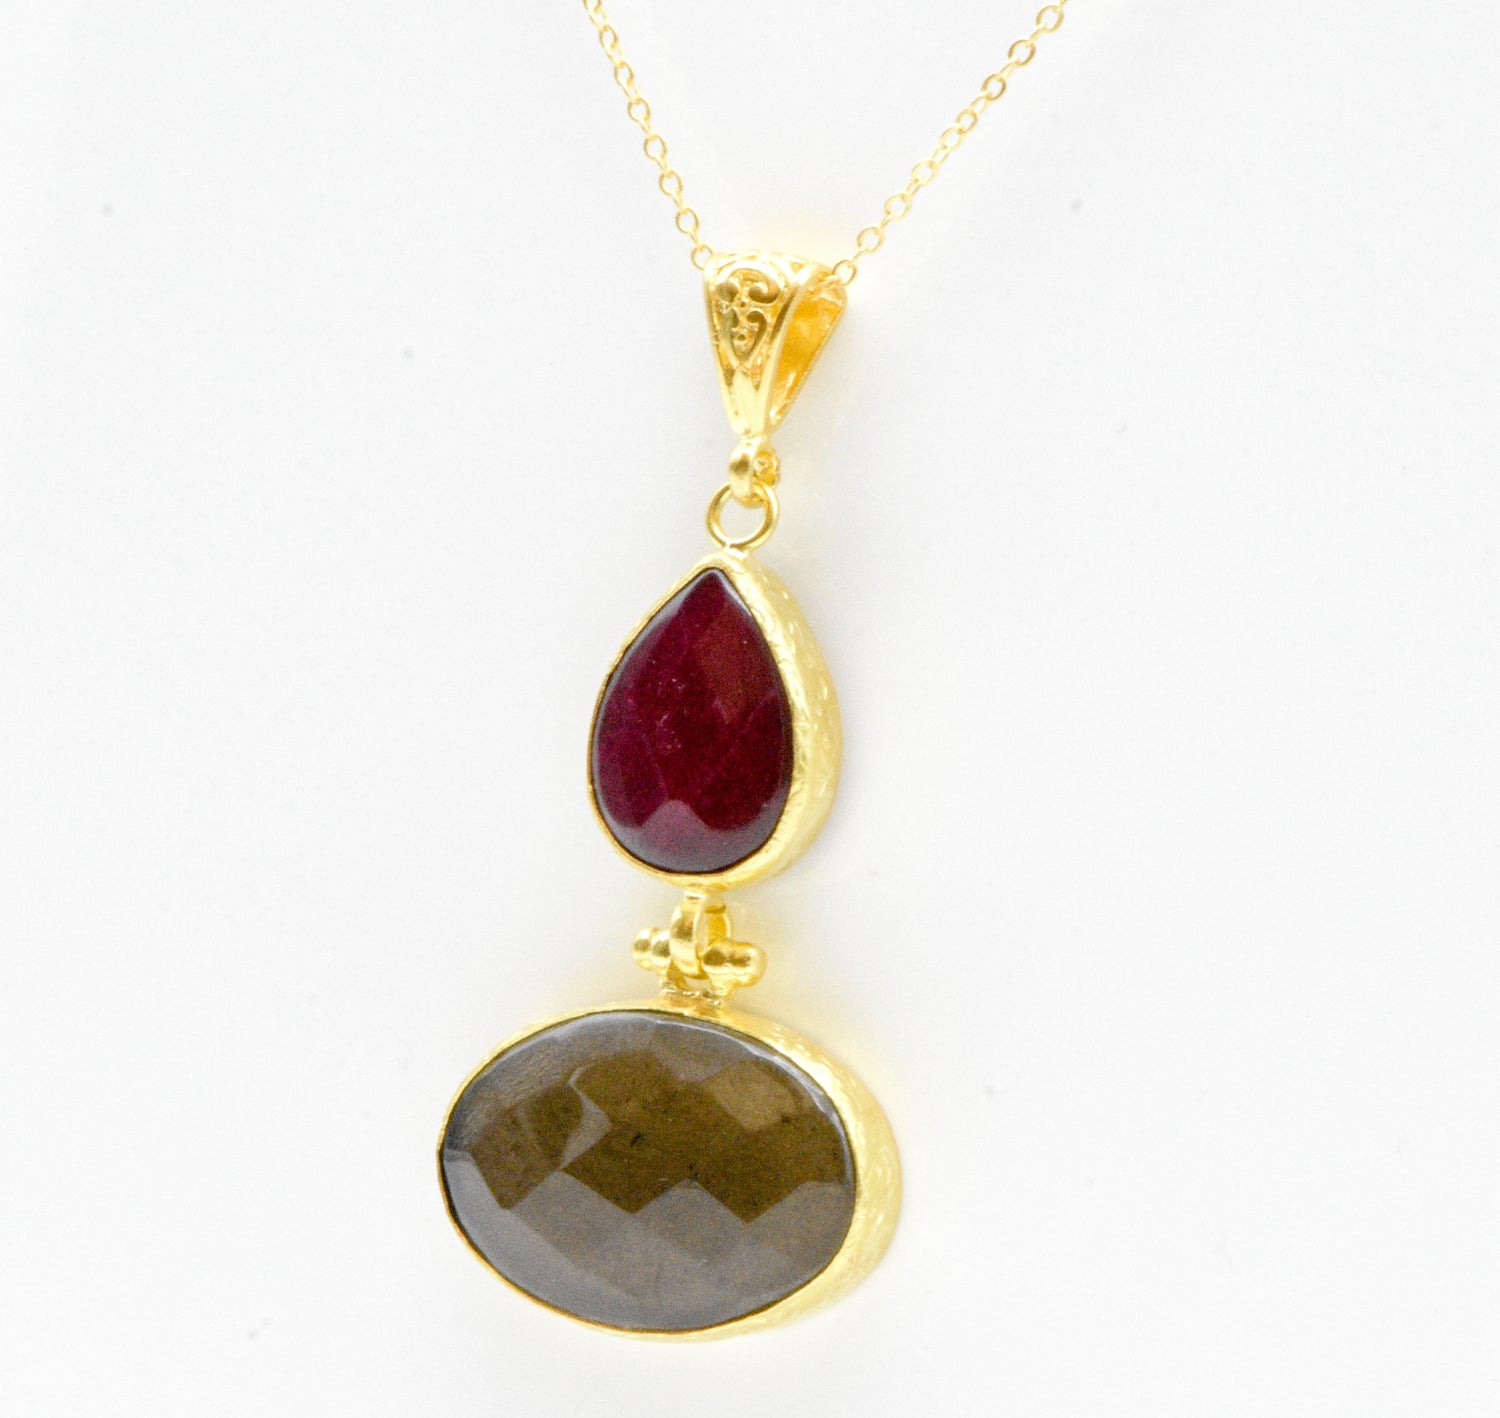 Aylas ottoman gold plated gem stone necklace Smoky Quartz, Agate - Ottoman Handmade Jewellery Hand Made Gold Plated